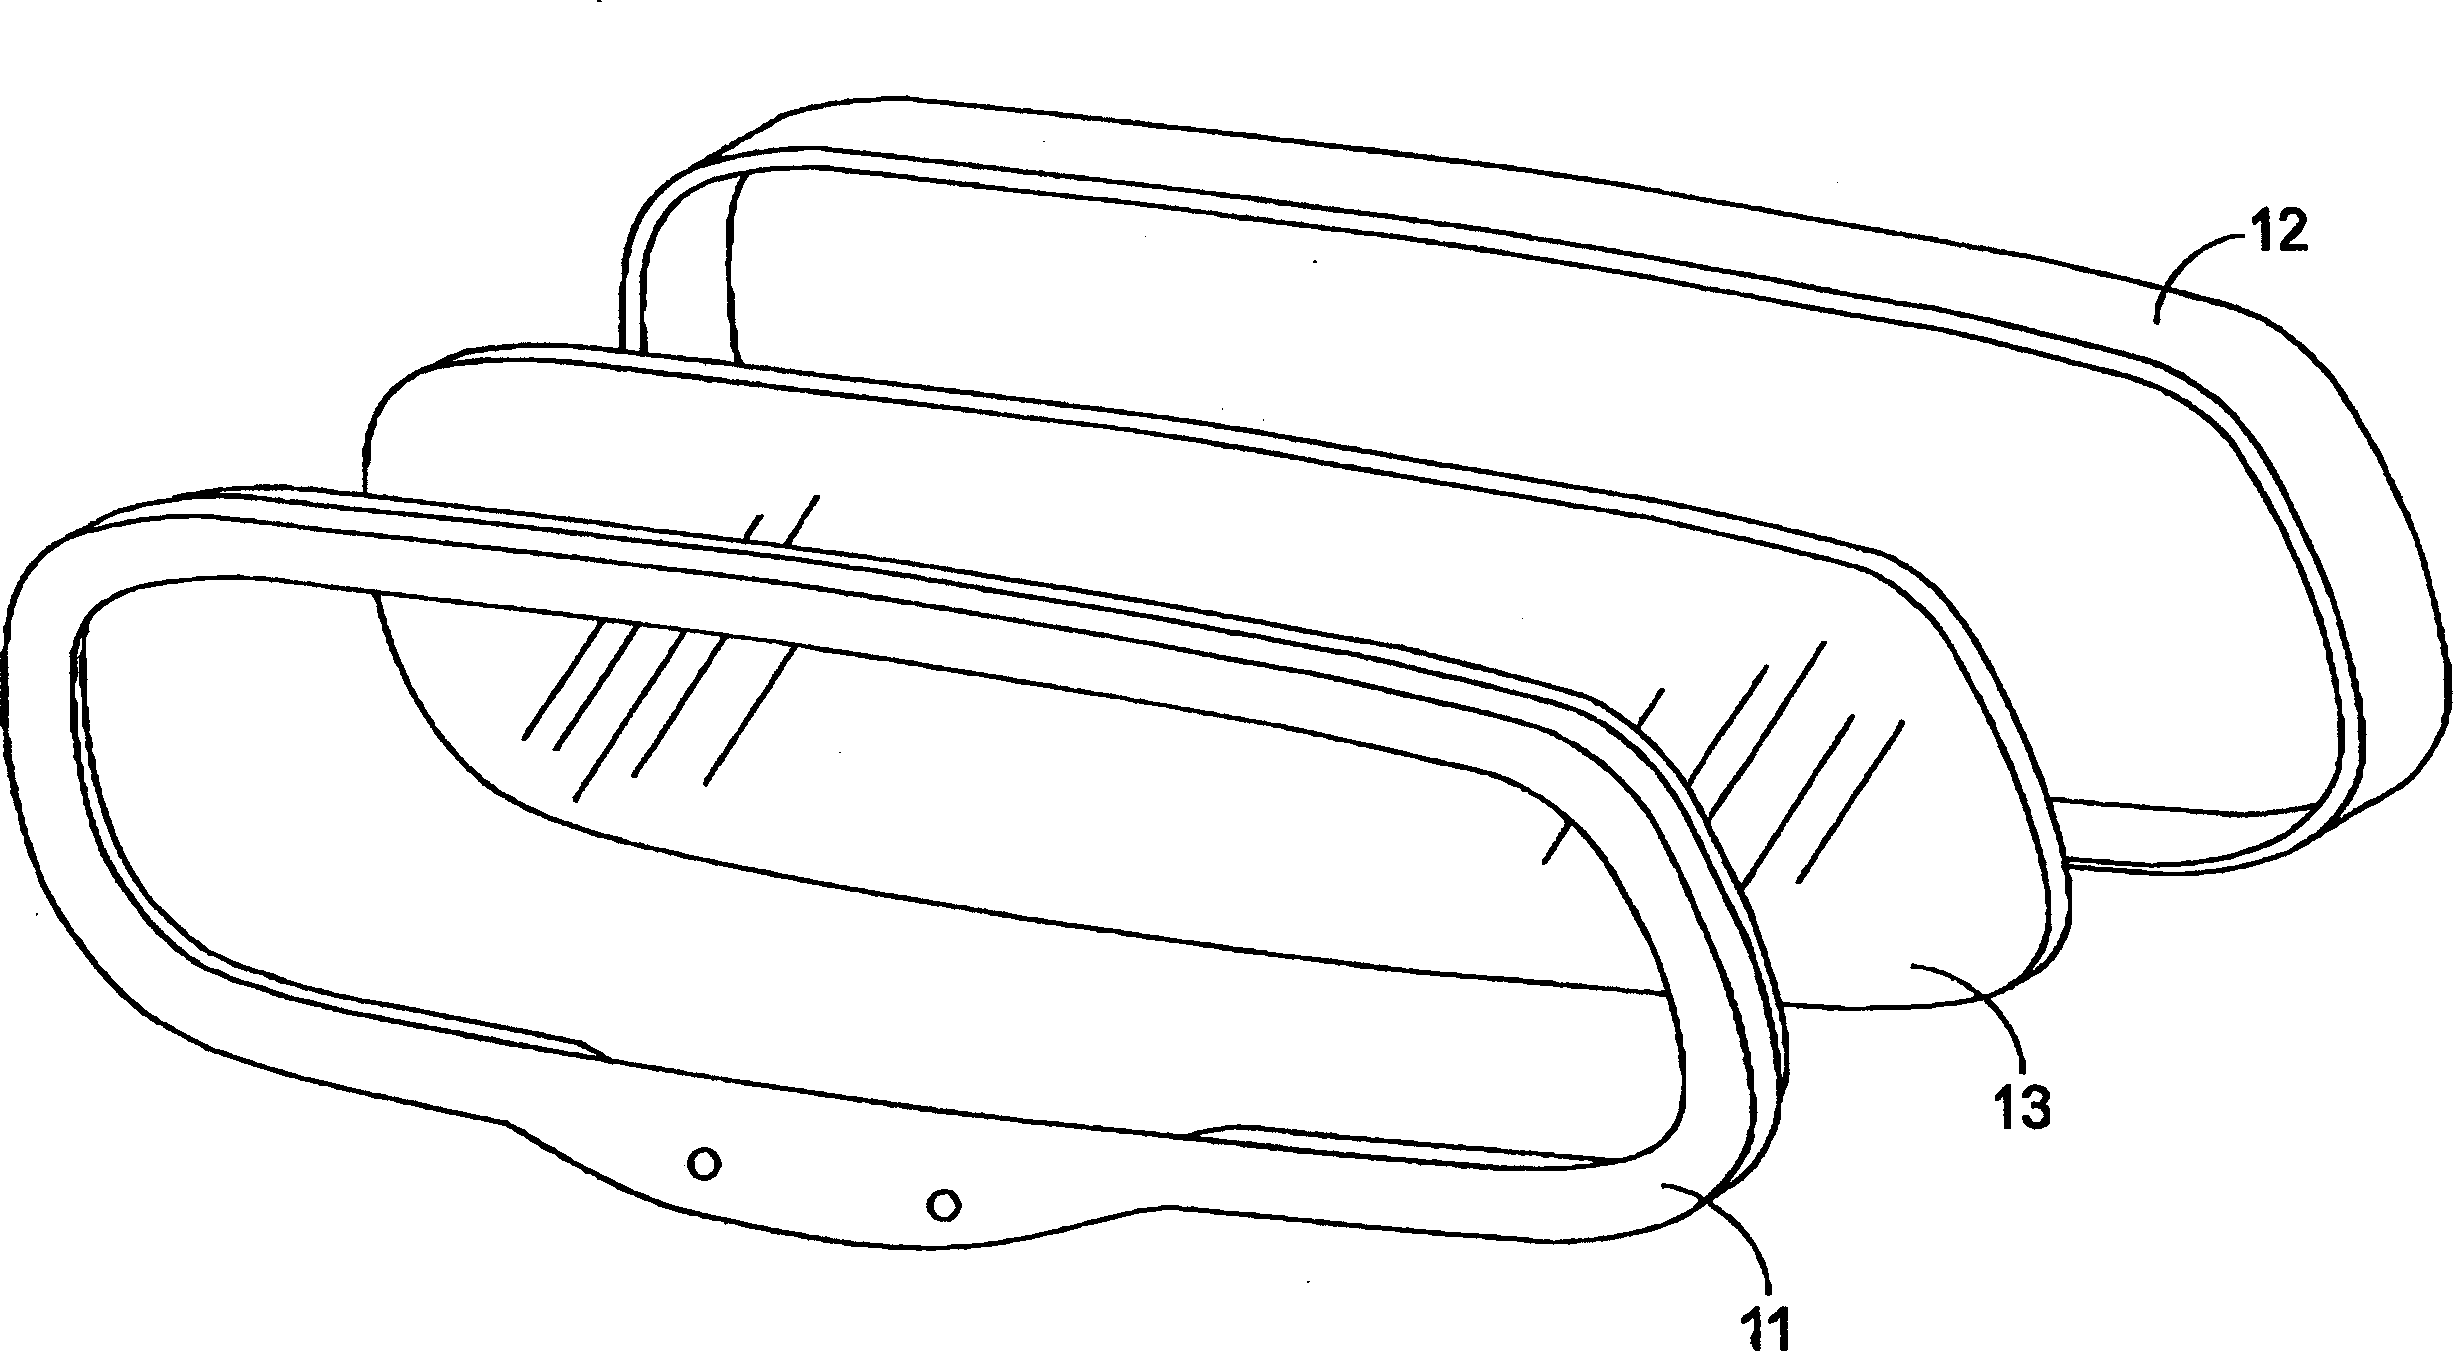 Rear-view mirror for vehicle